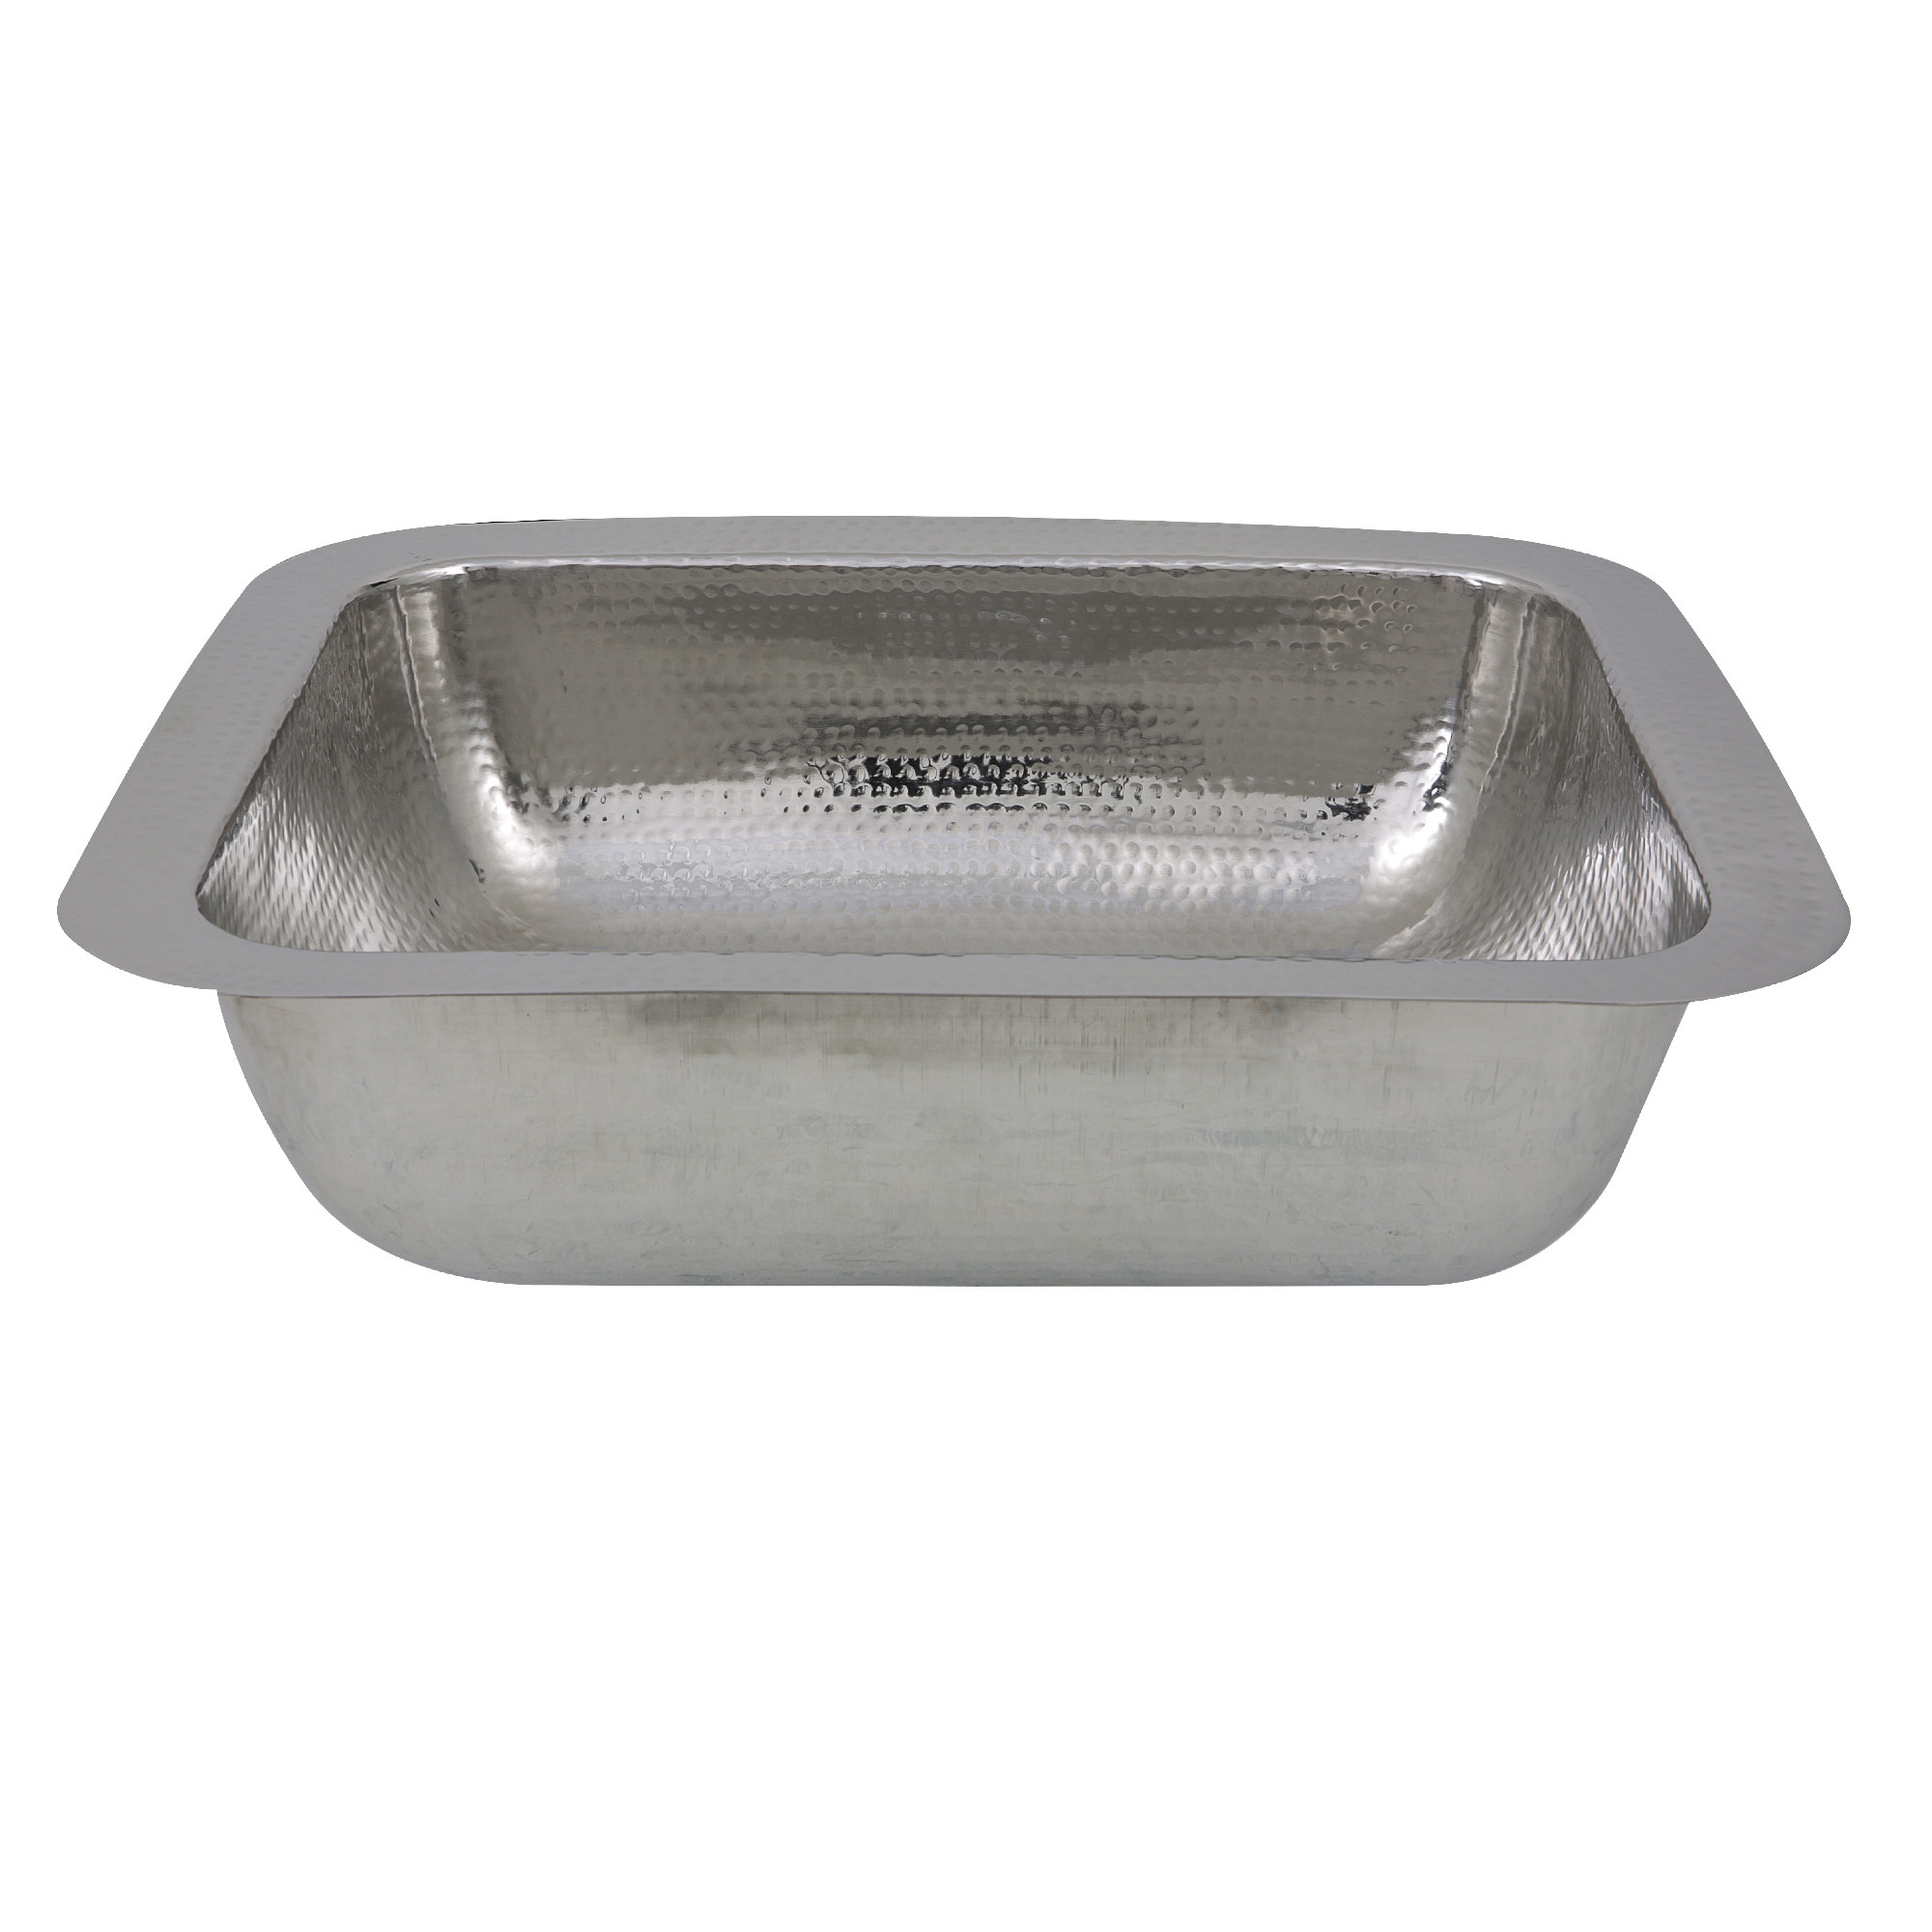 Nantucket Sinks RES 17.5 Inch Hammered Stainless Steel Rectangle Bar Sink